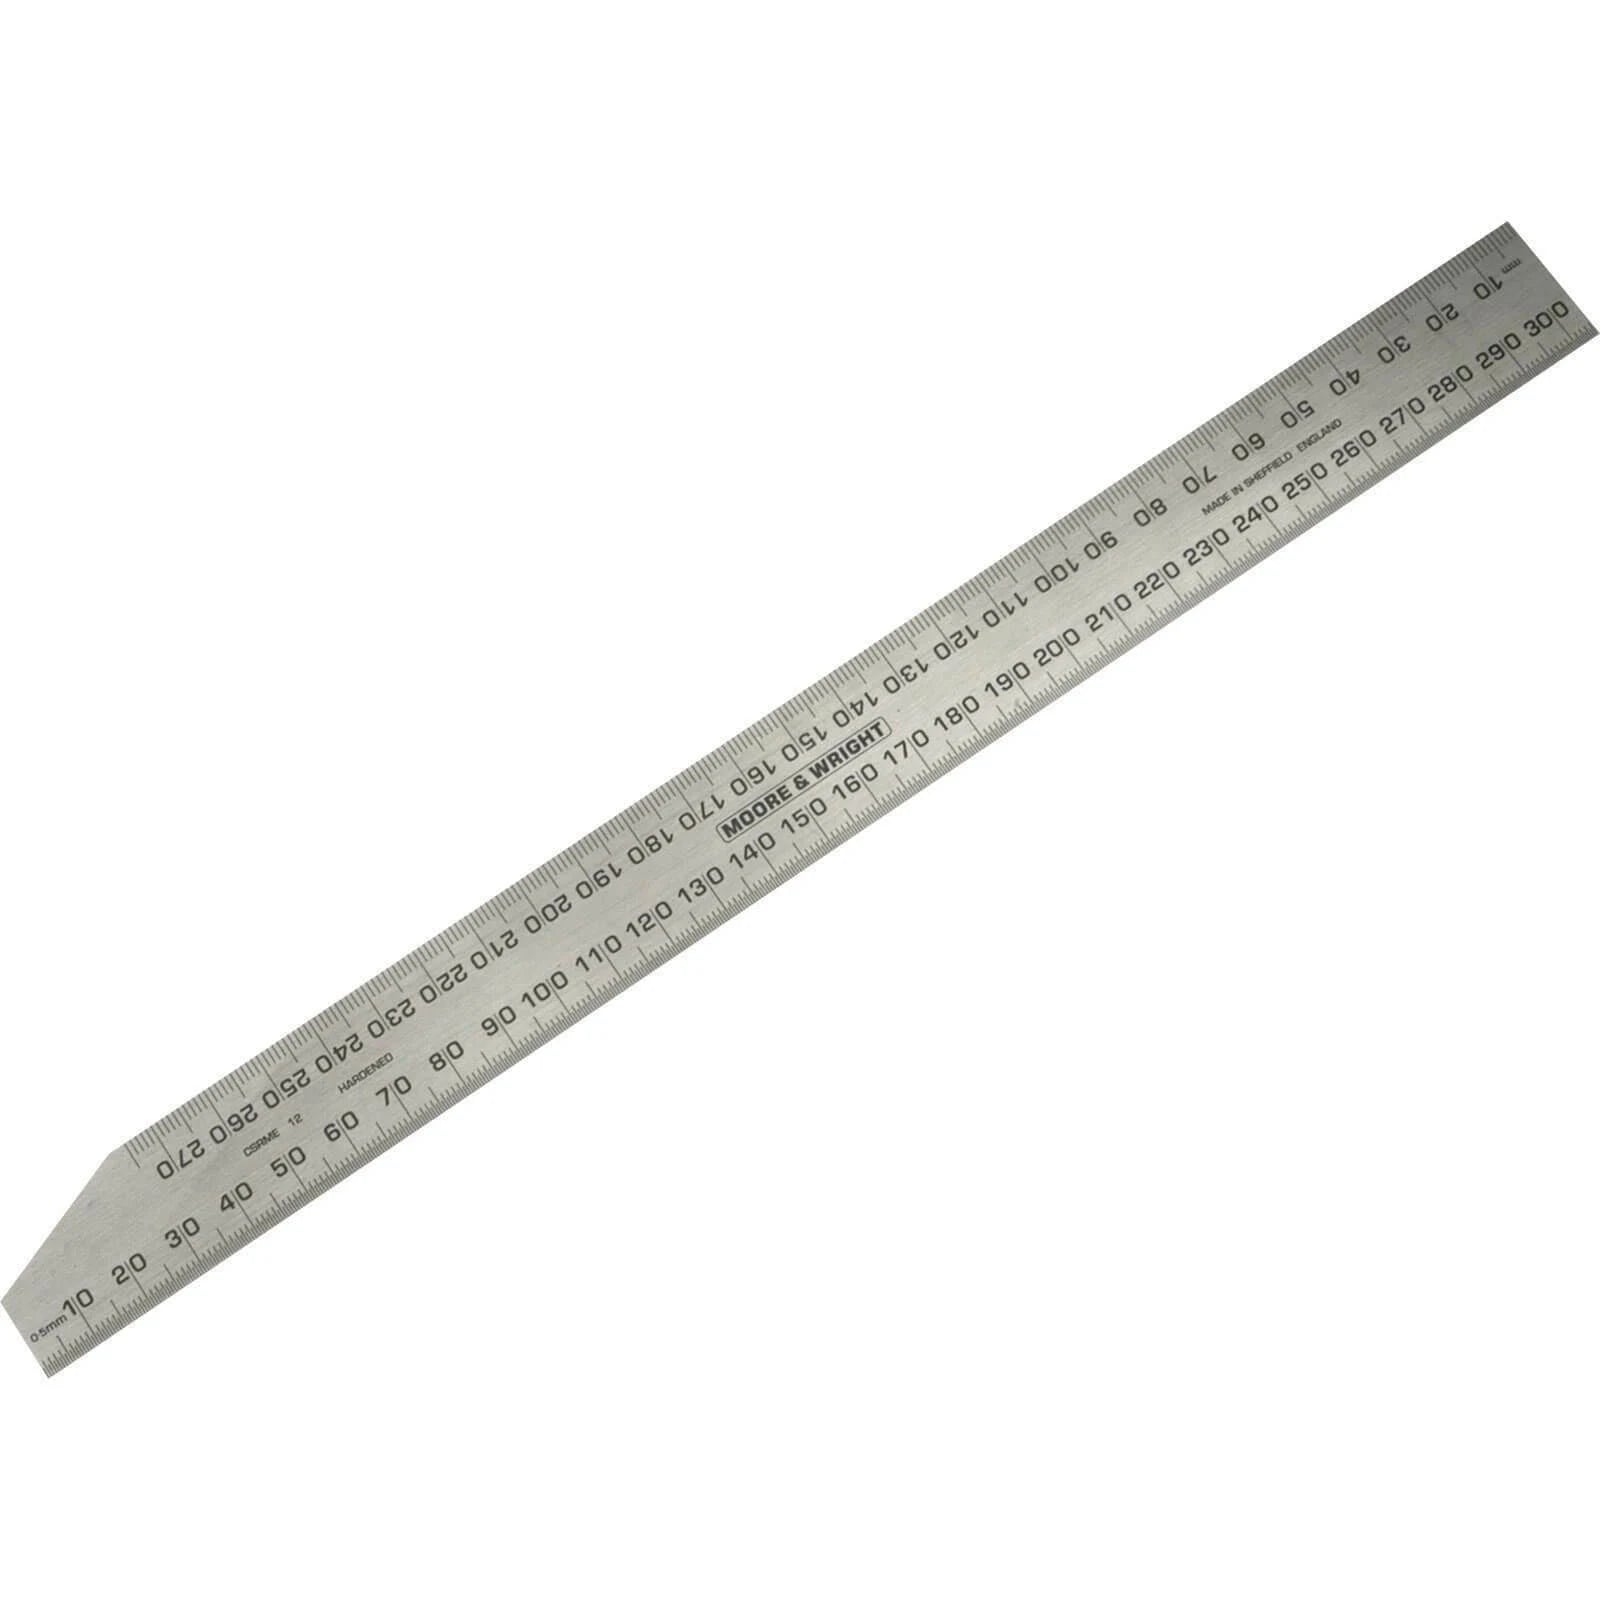 Replacement Ruler Metric by Moore & Wright